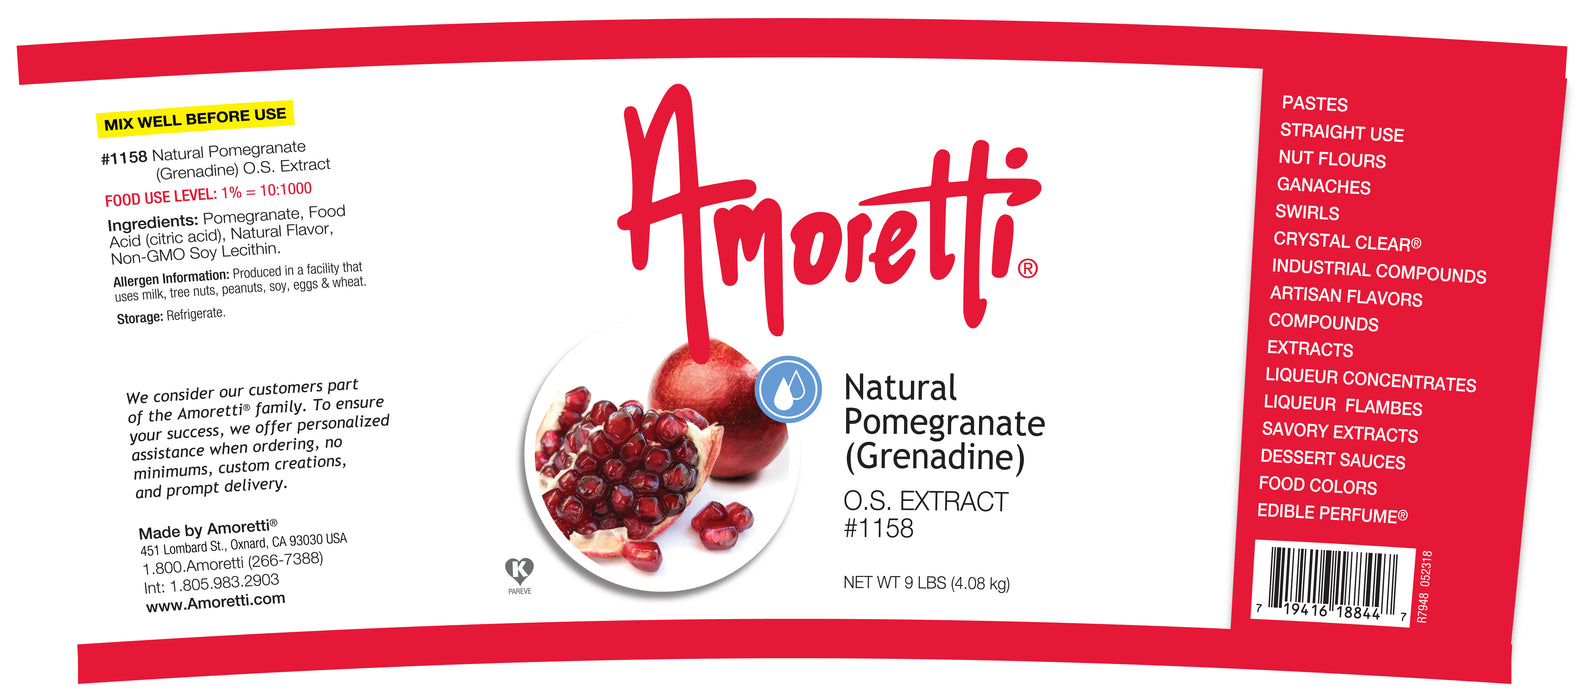 Pomegranate (Grenadine) Extract Oil Soluble (natural flavor)